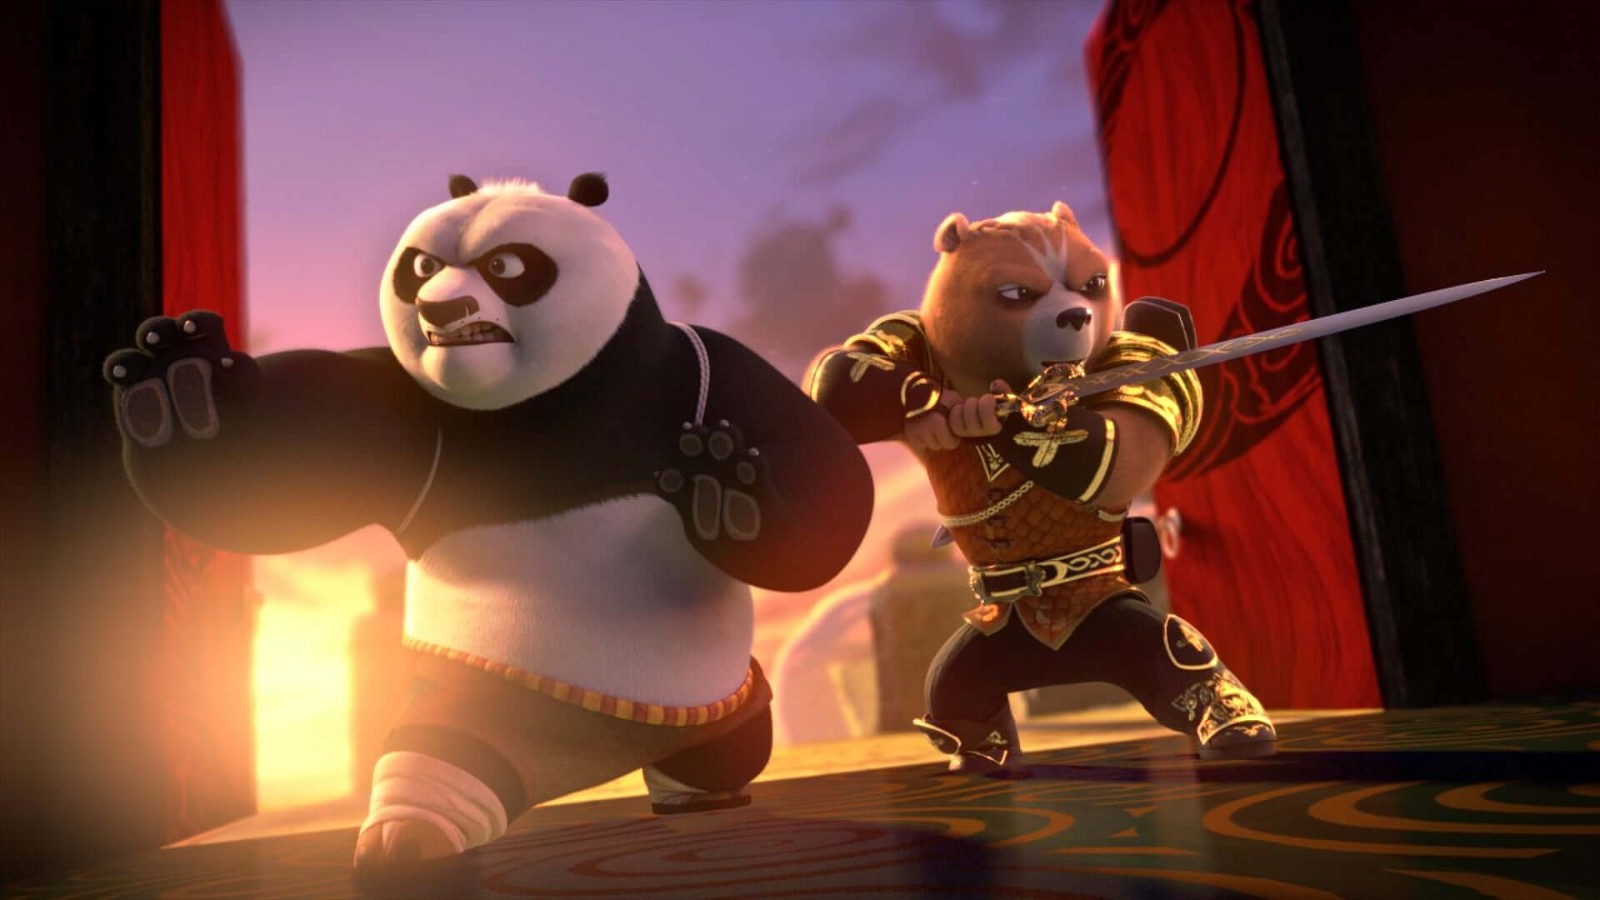 Kung Fu Panda 4 reviews are largely positive